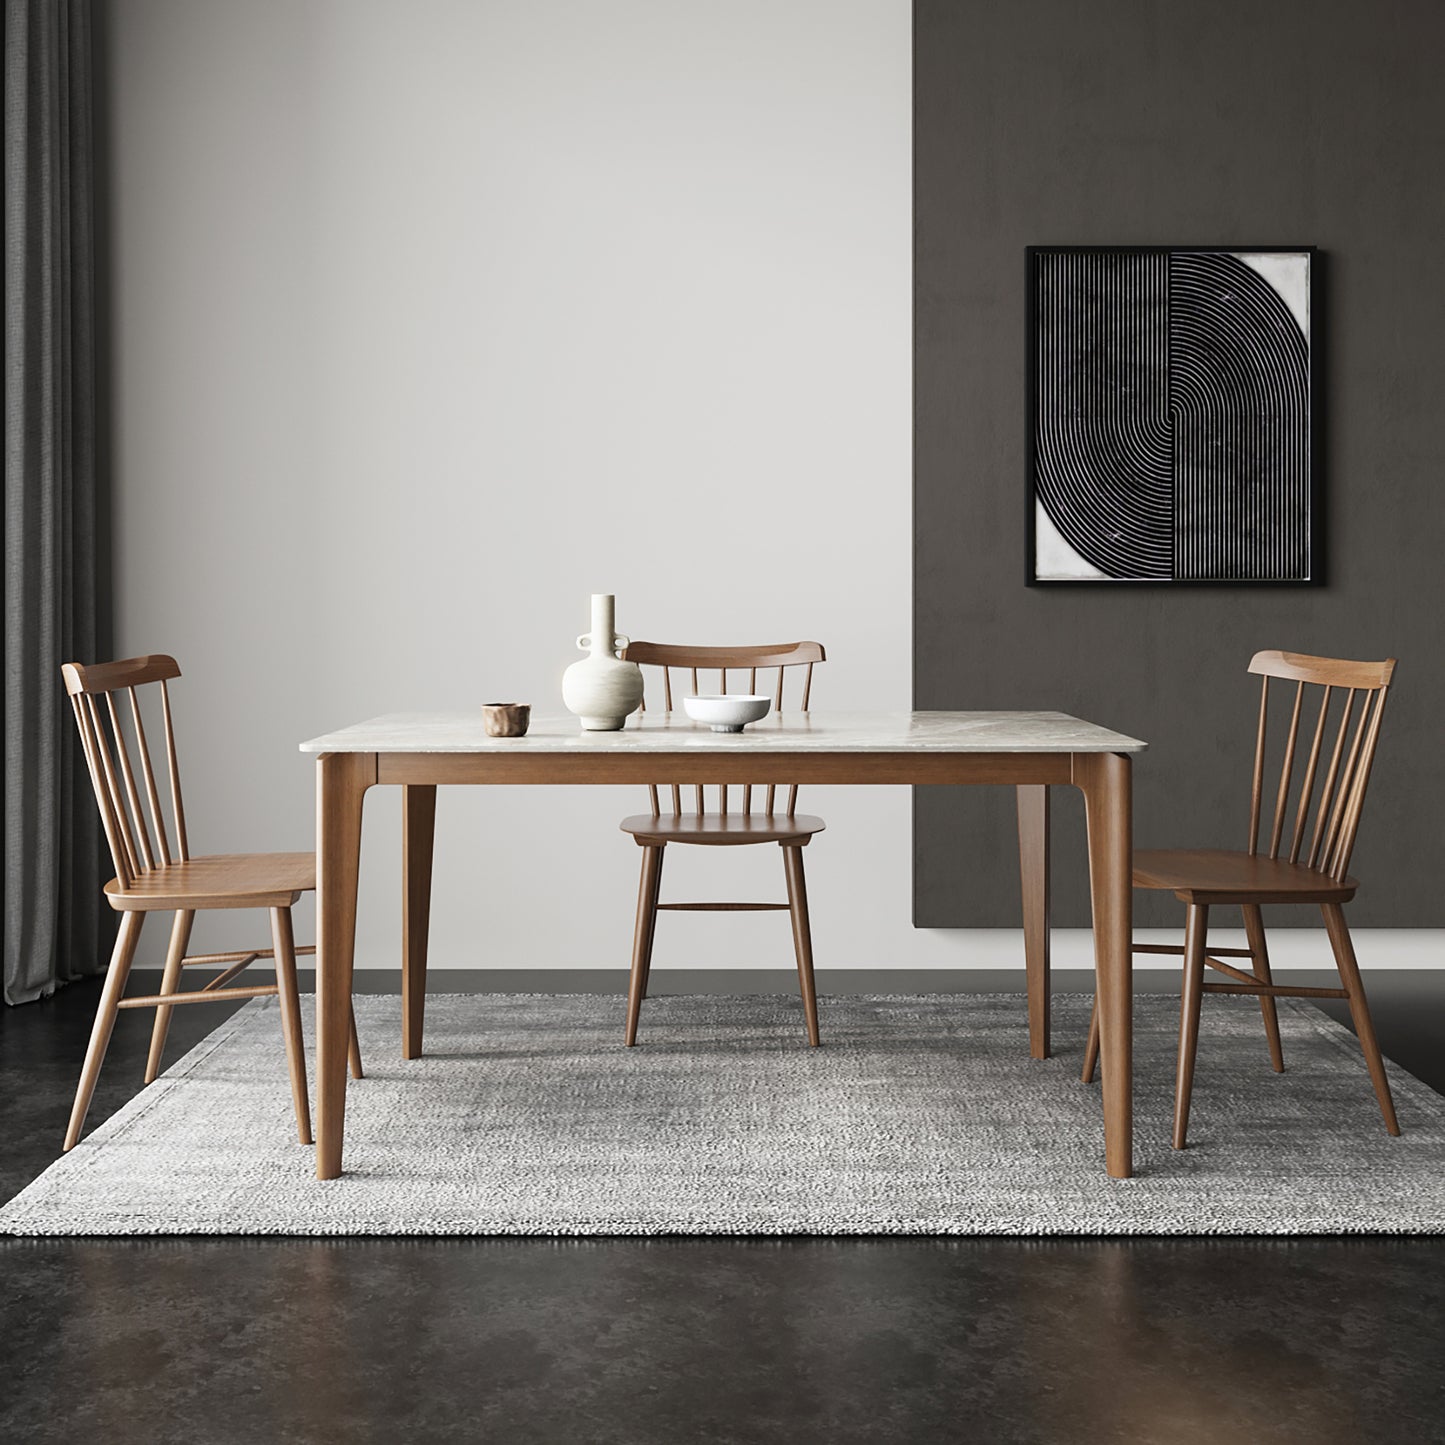 JASIWAY Simple Slate Wooden Rectangular Dining Table